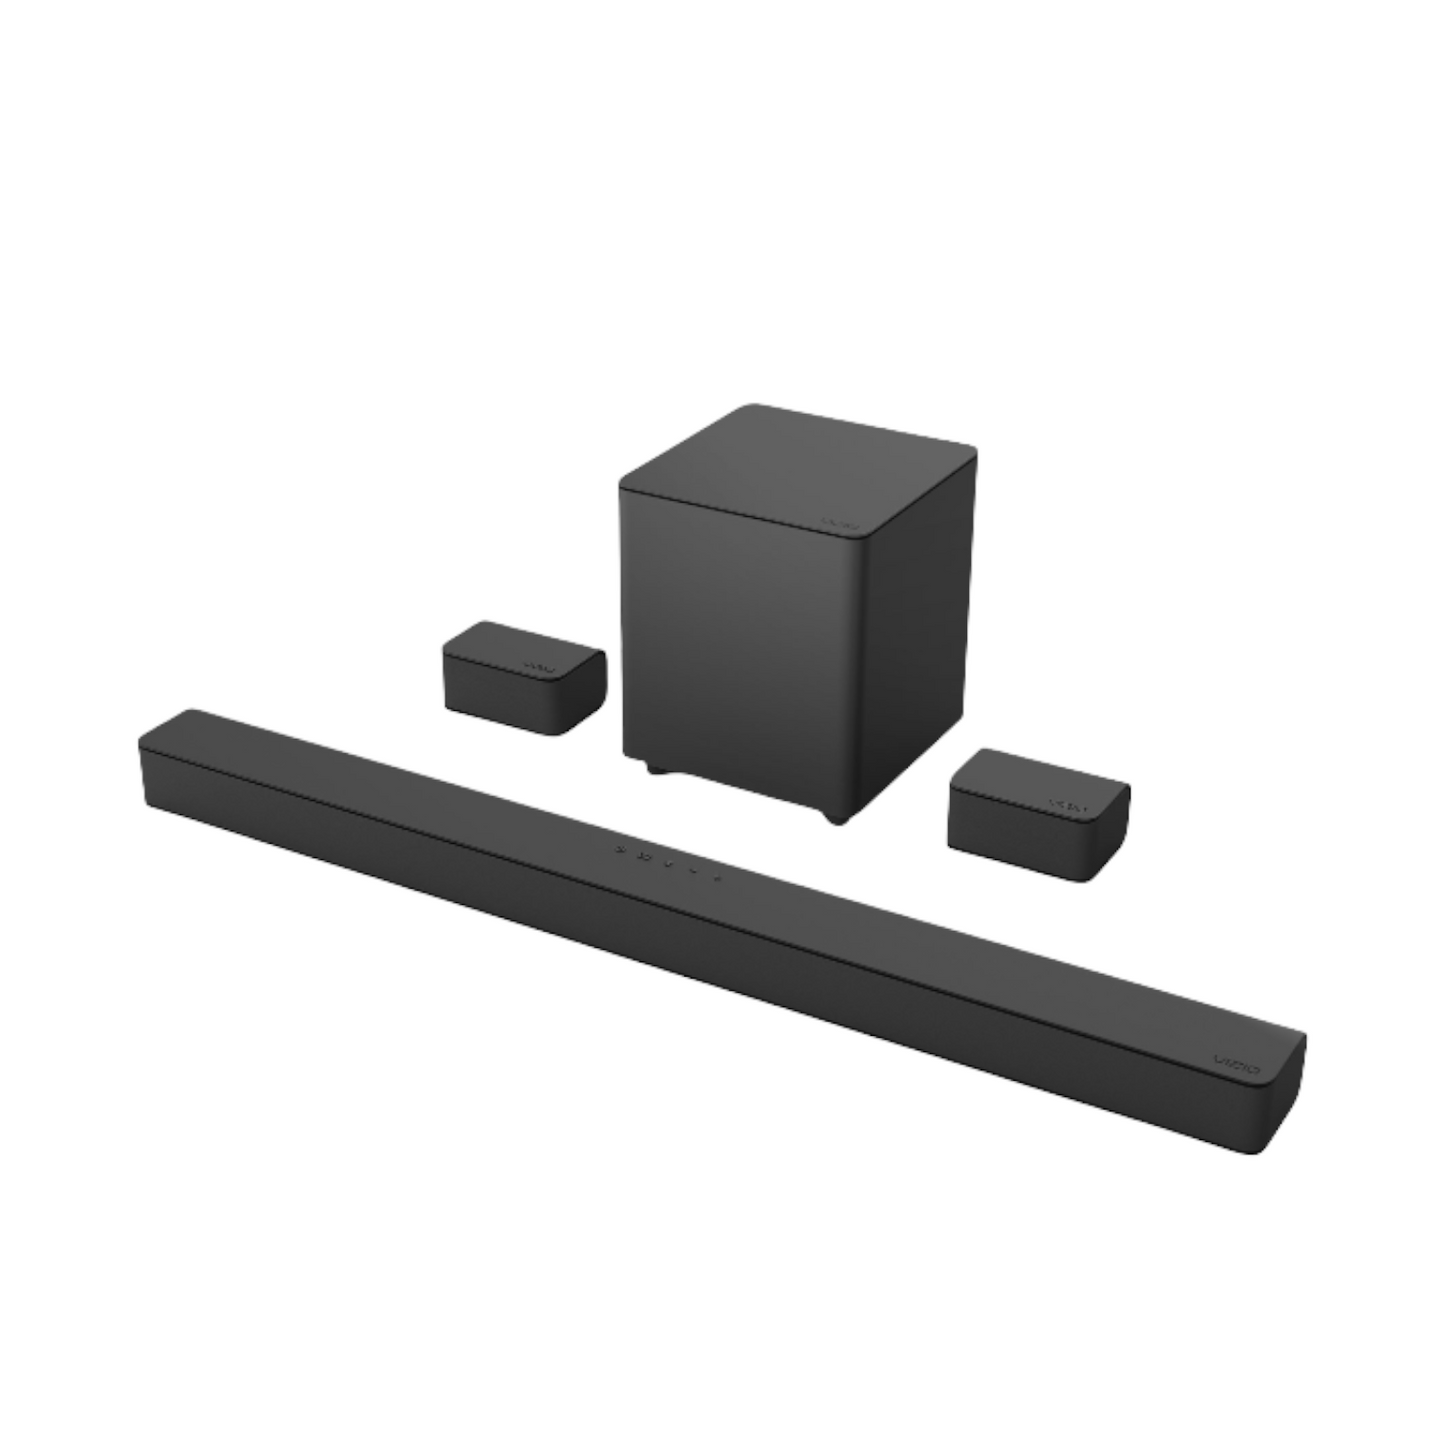 VIZIO - 5.1-Channel V-Series Soundbar with Wireless Subwoofer and Dolby Audio 5.1/DTS Virtual:X - Black